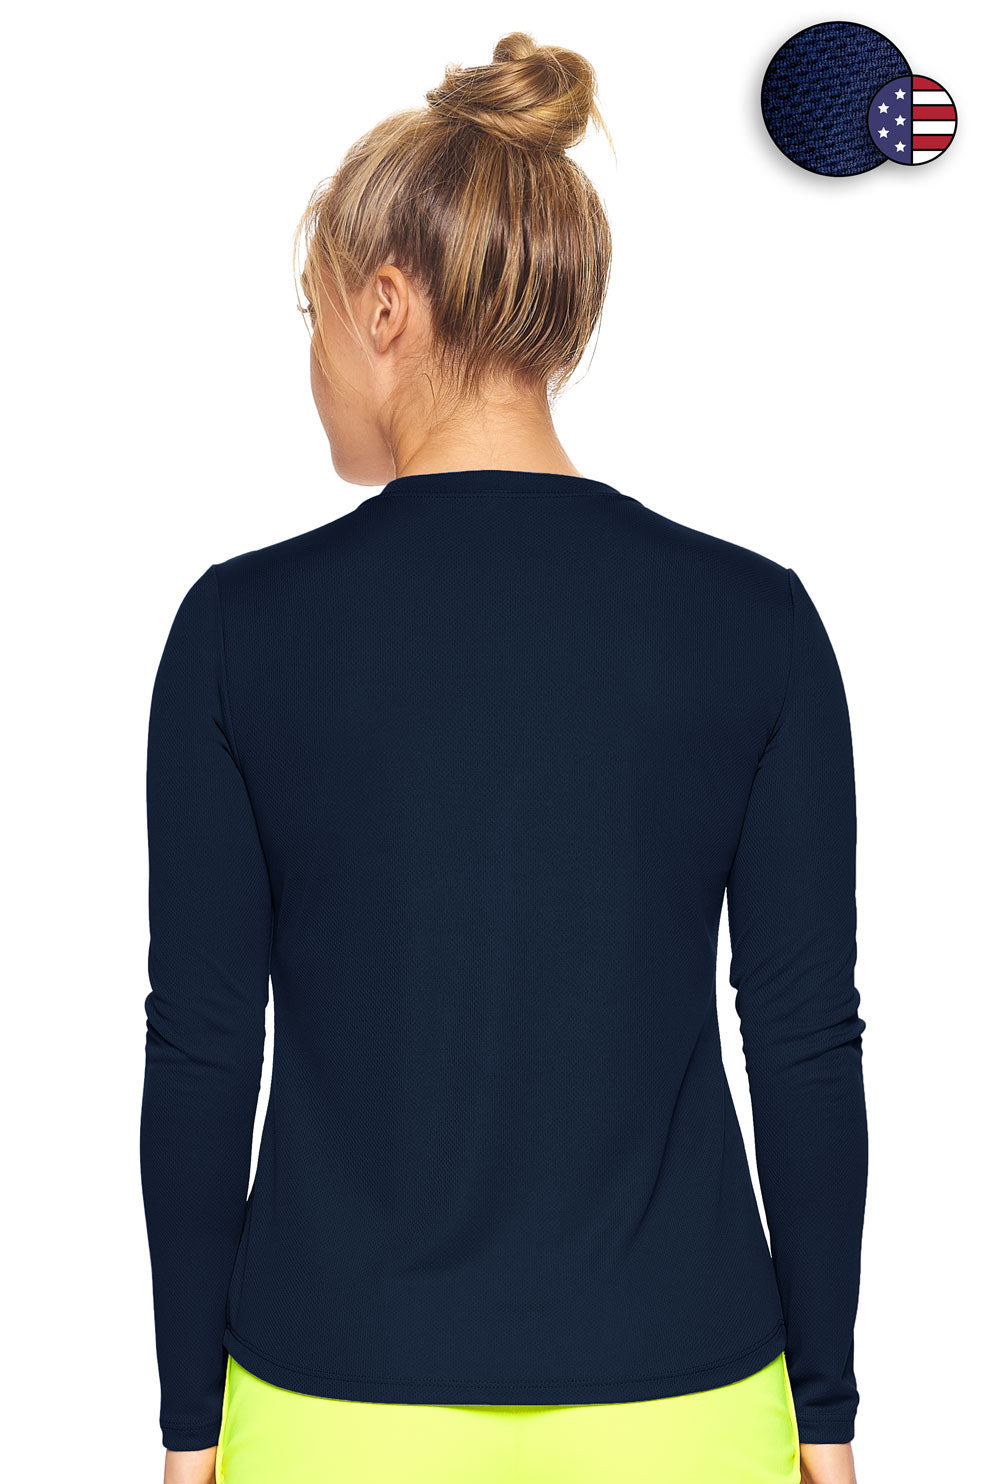 Expert Brand Wholesale Women's Oxymesh Crewneck Performance Tee Made in USA AJ301D Navy image 3#navy-blue